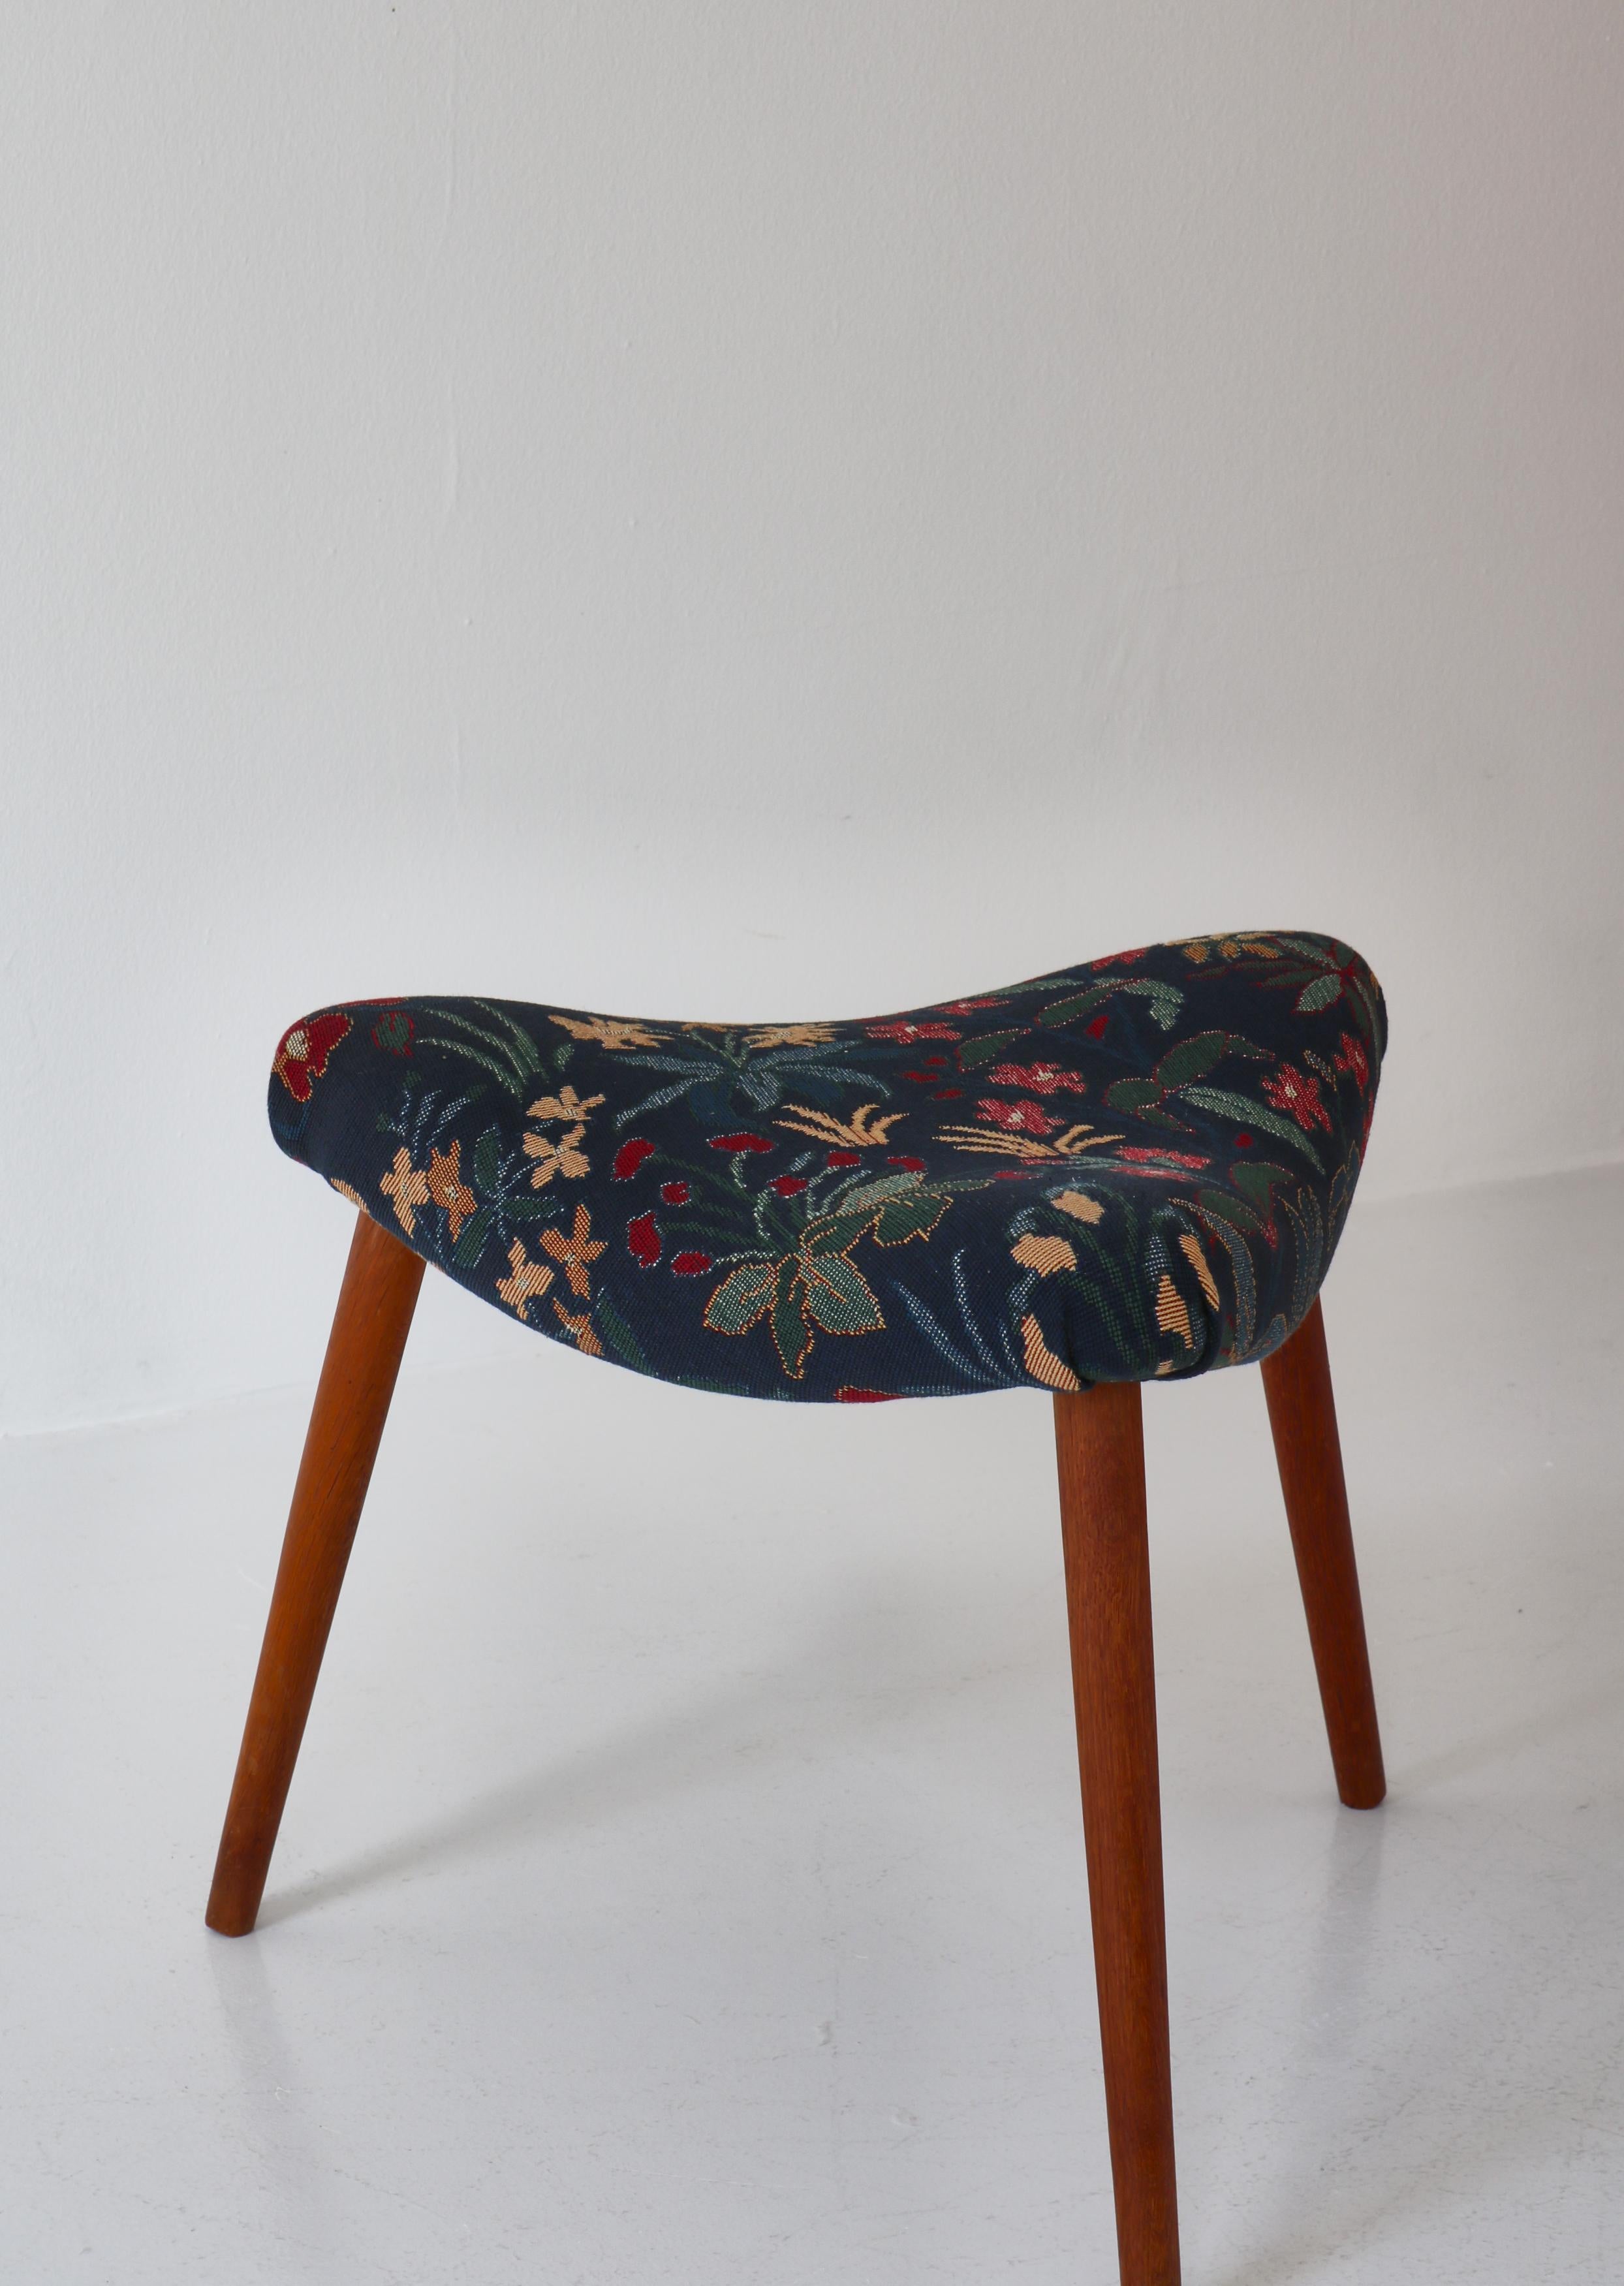 Scandinavian Modern Triangular Stools in Blue Floral Tapestry, 1950s For Sale 6